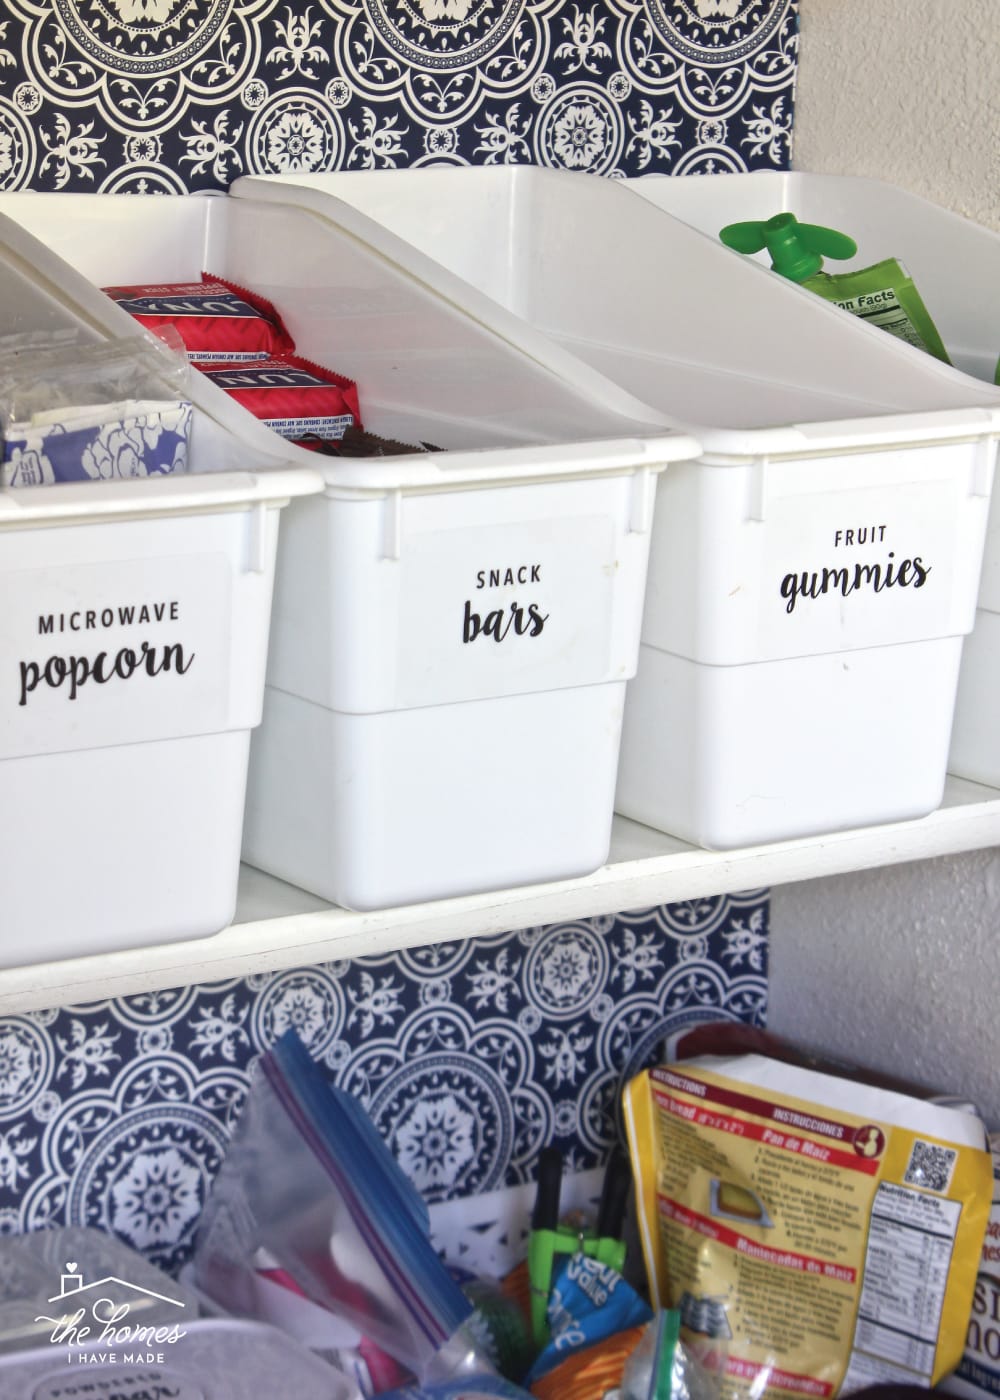 Really Good Stuff Small Clear Plastic Stackable Storage Tubs with Locking Lid